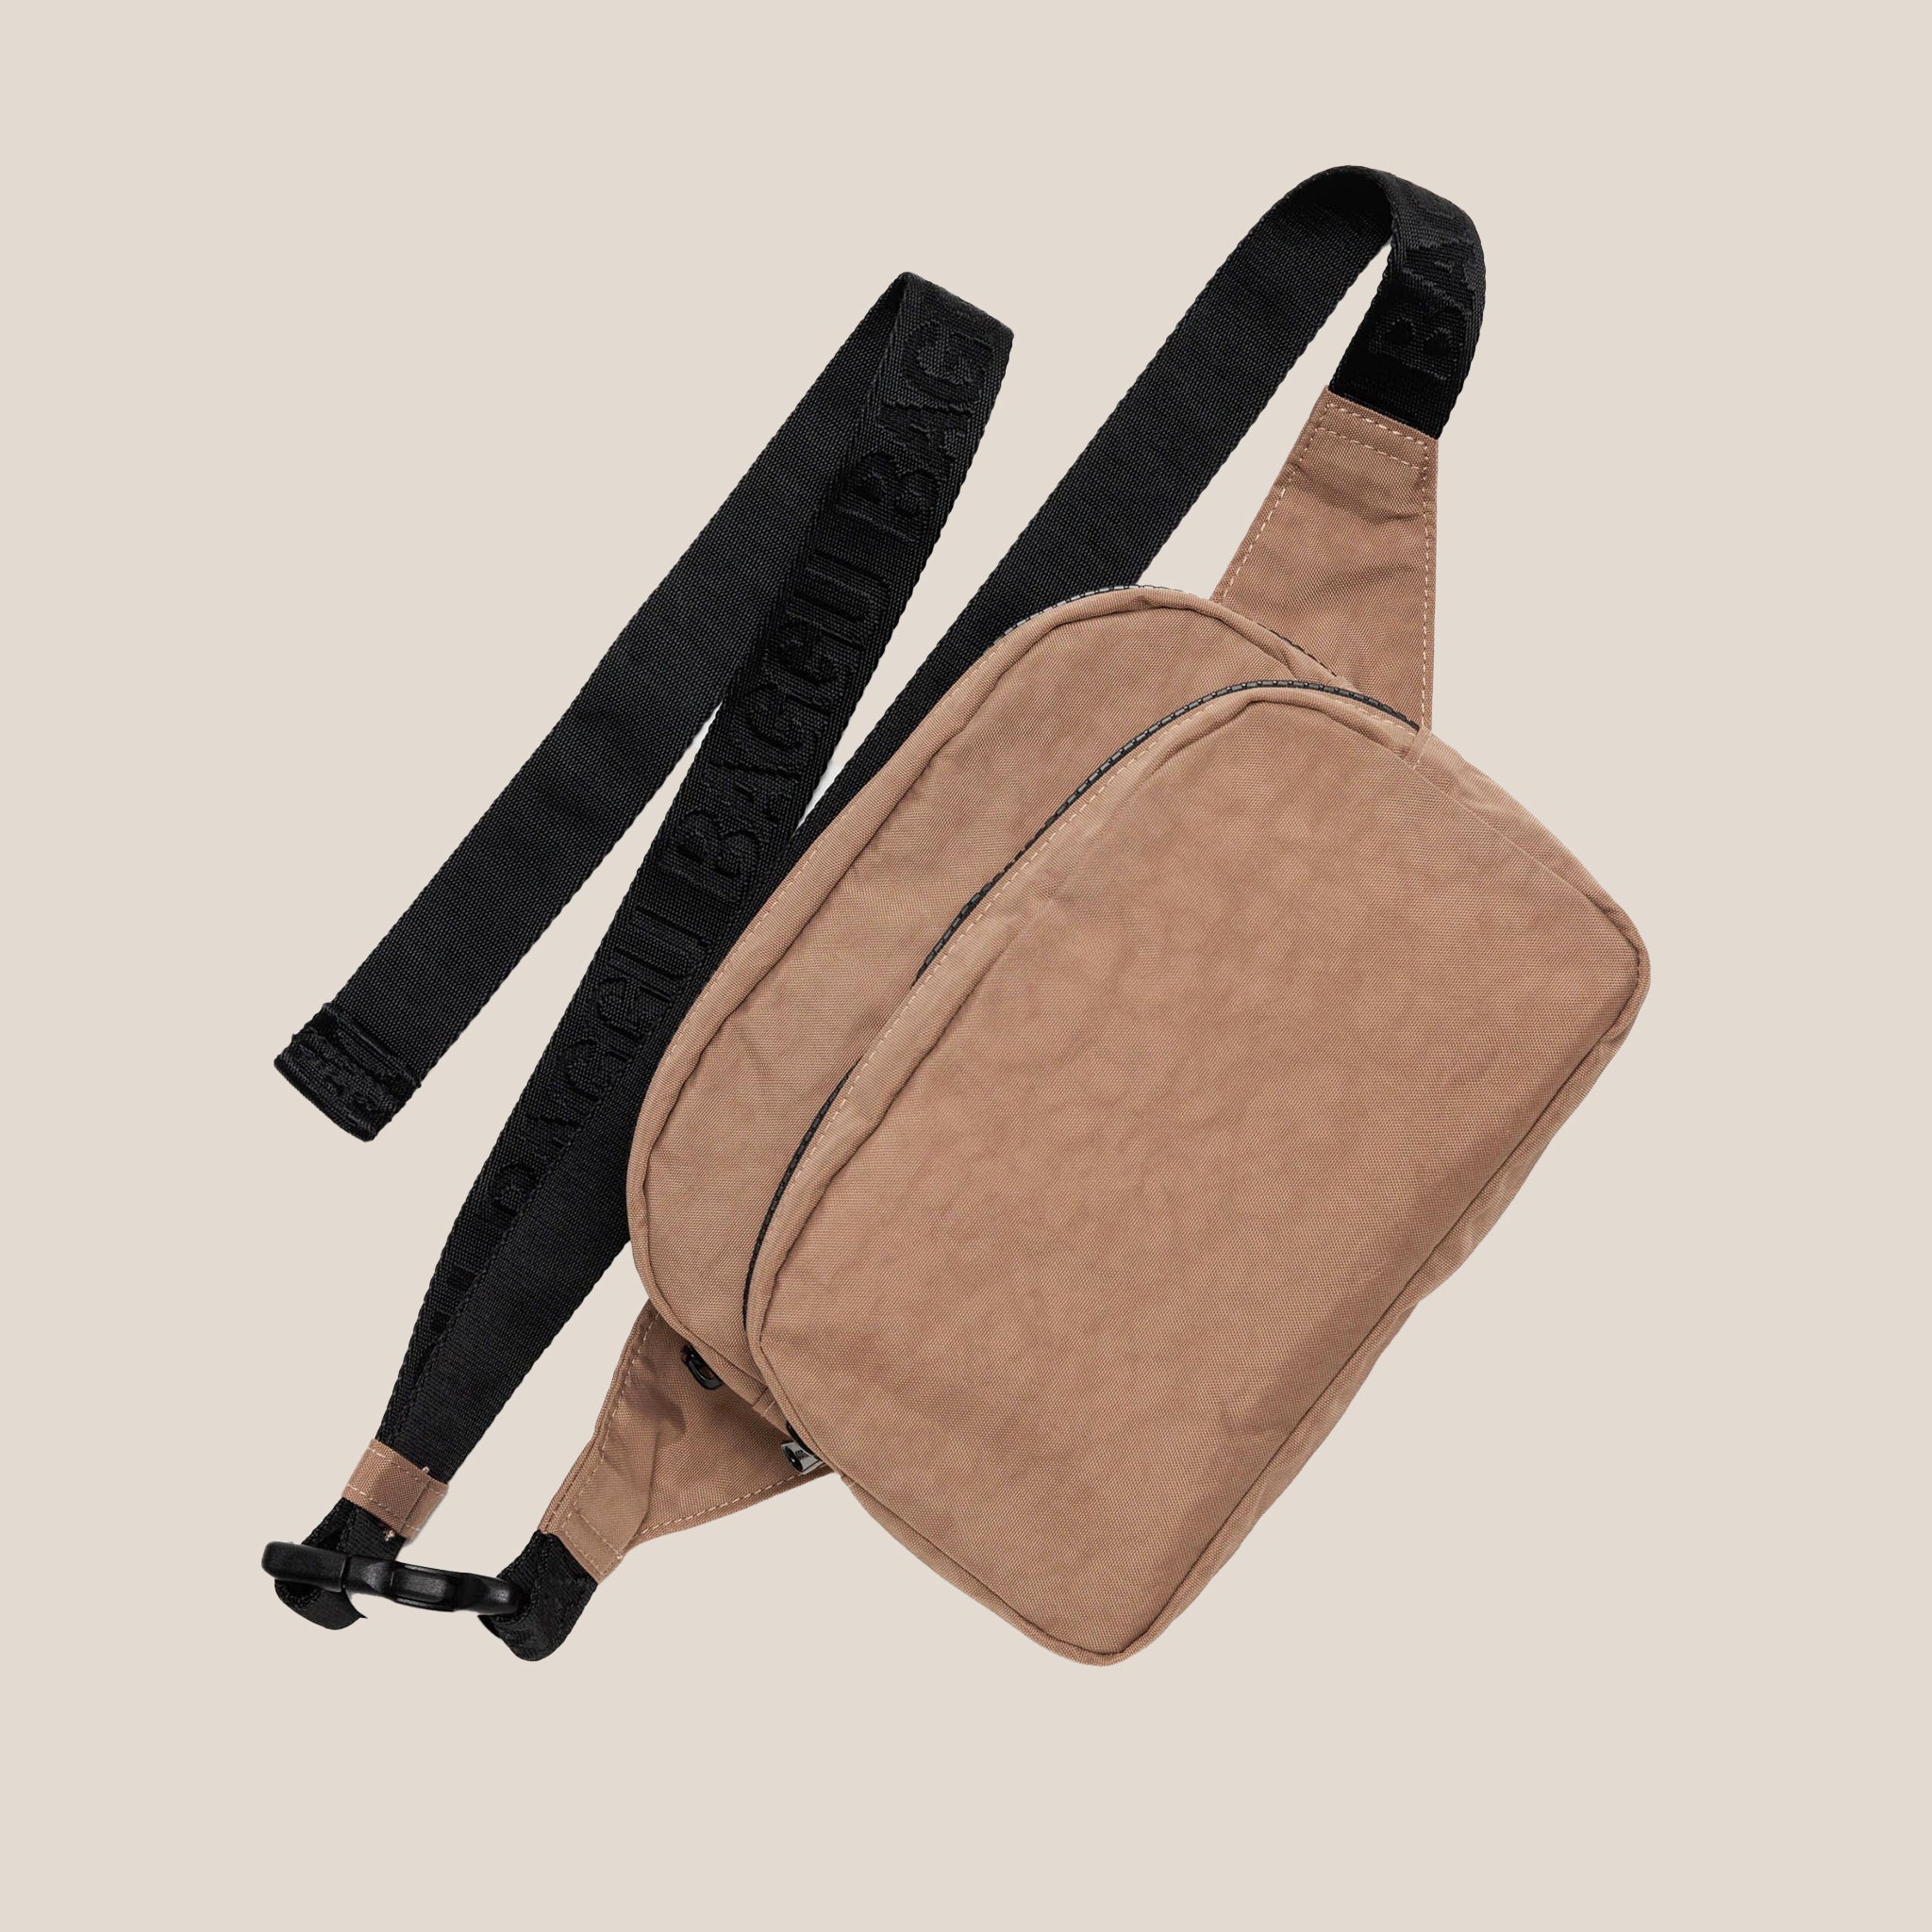 A light brown nylon fanny pack with a black strap and details.